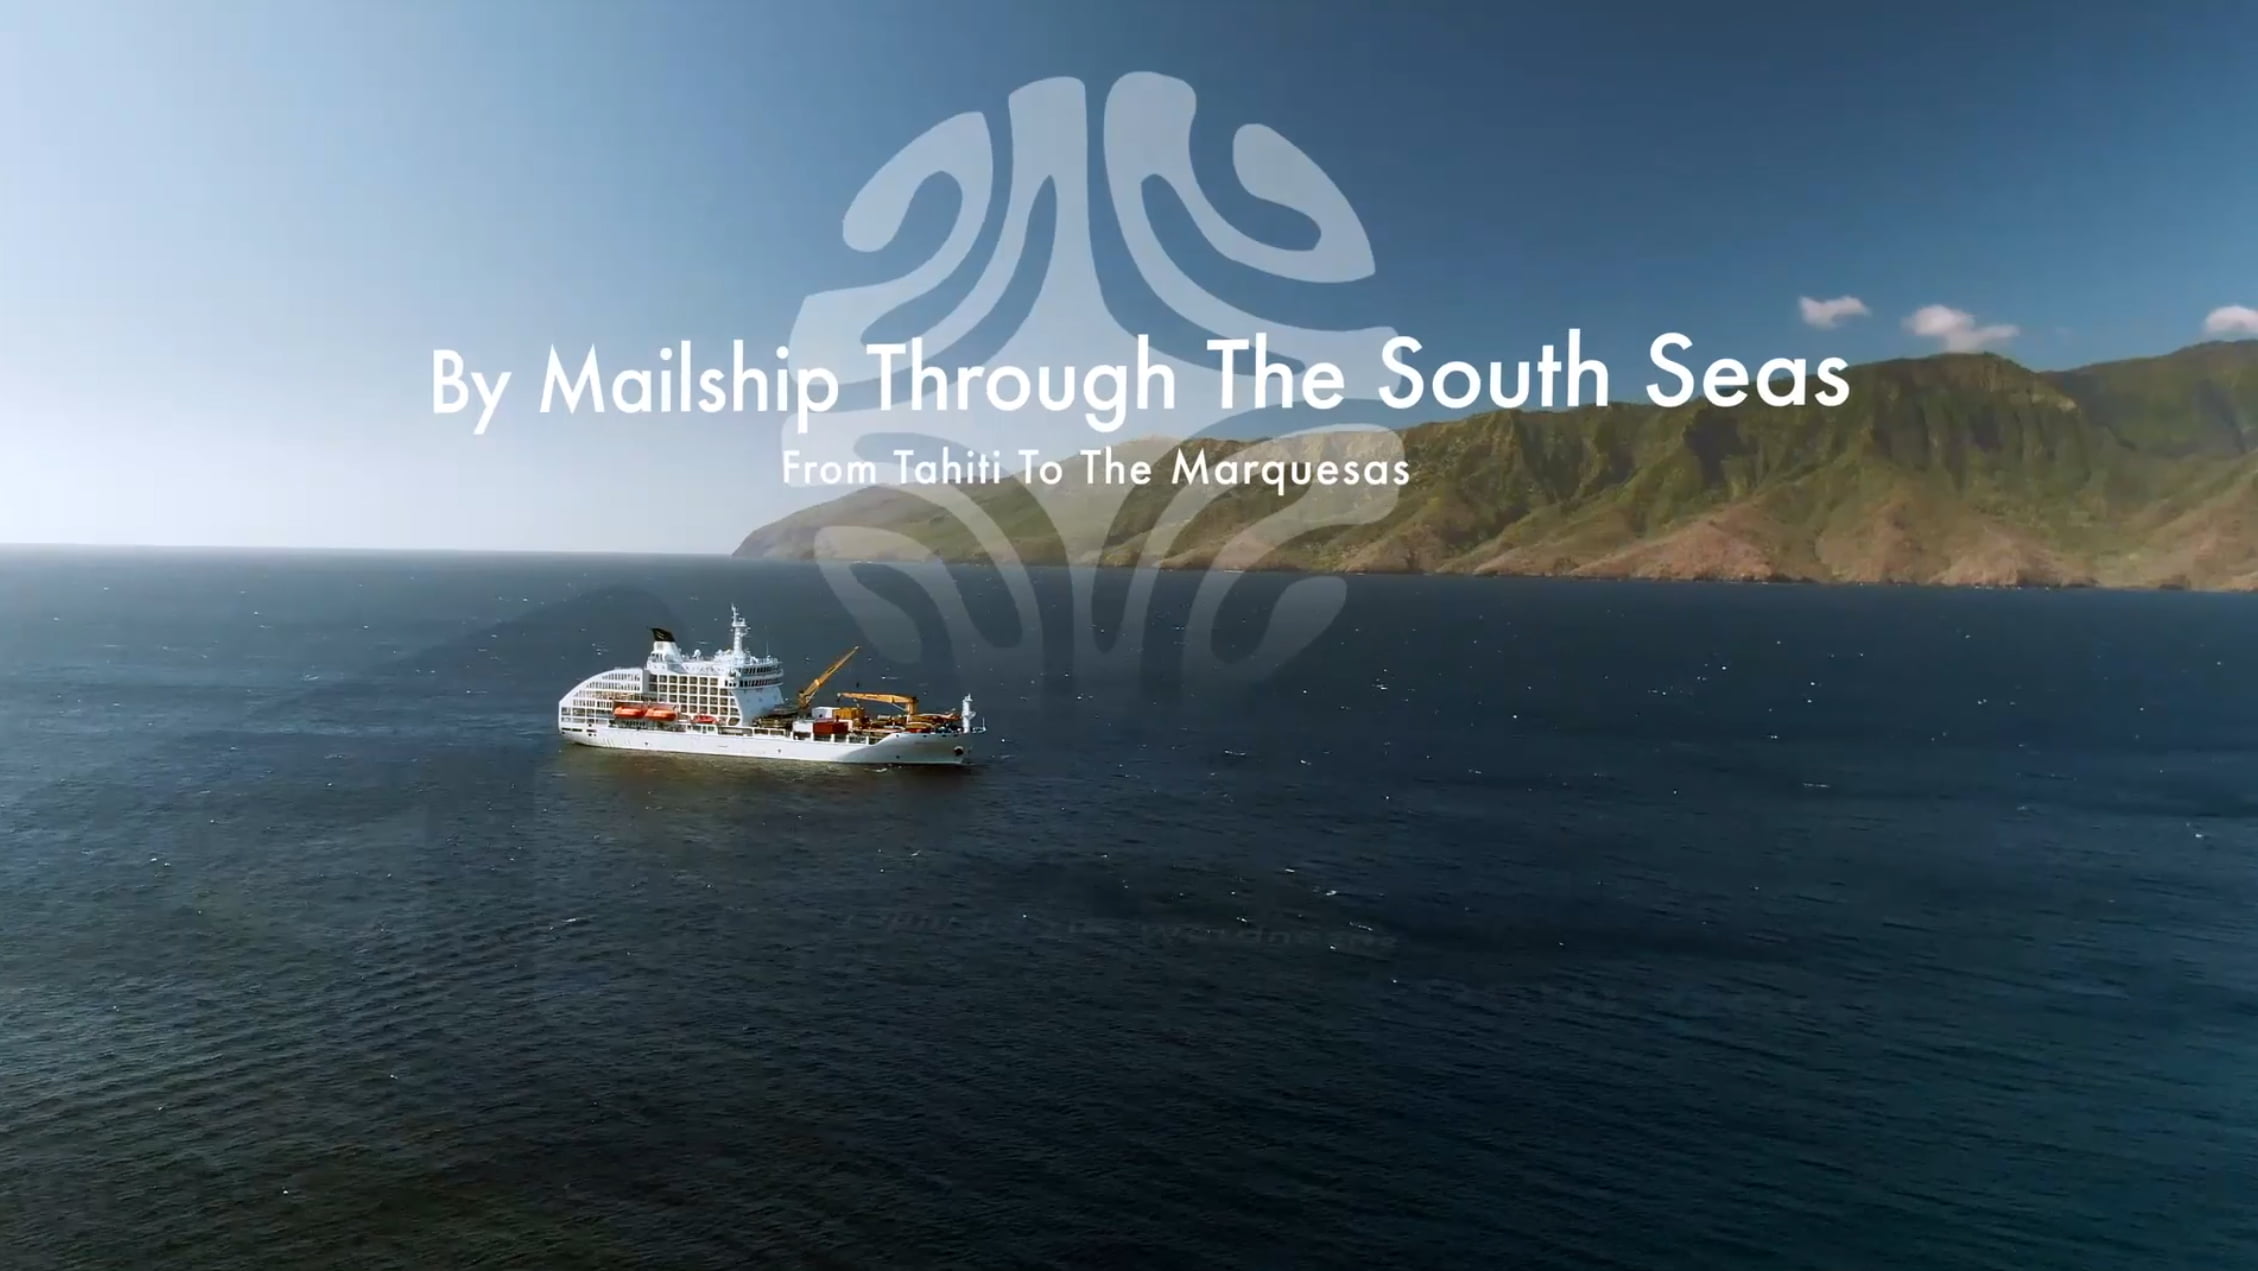 By Mail Ship Through the South Seas